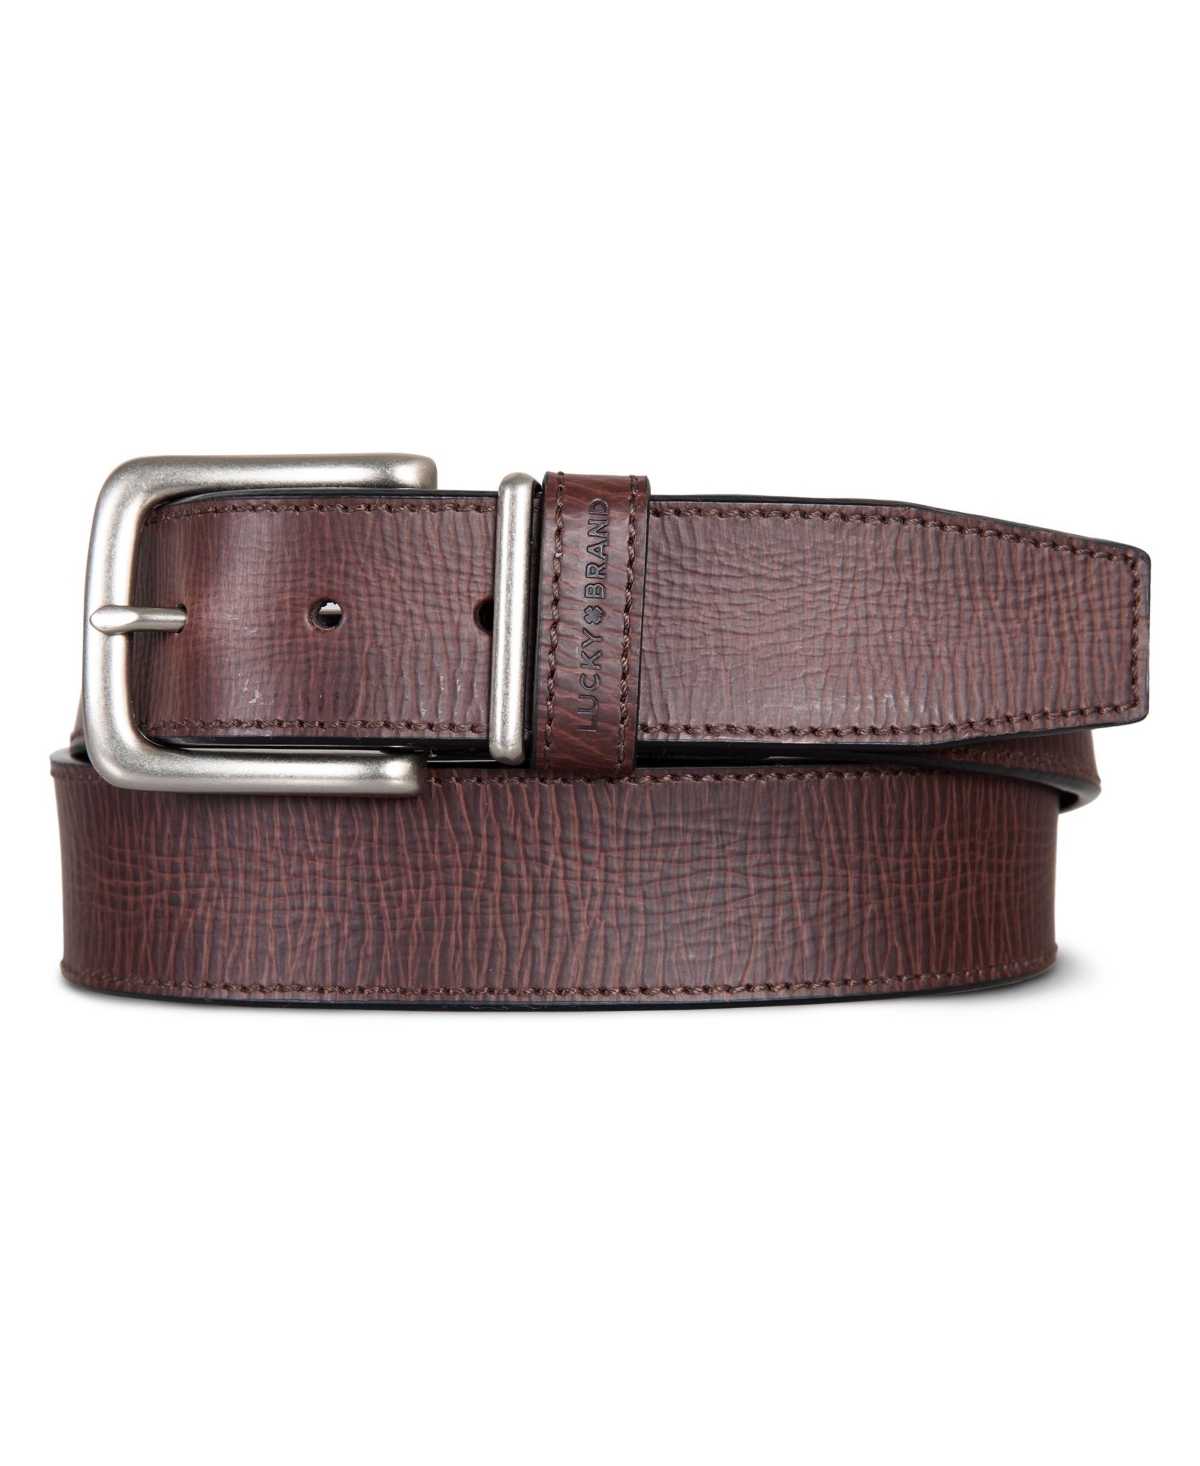 Men's Leather Jean Belt with Metal and Leather Keeper - Tan